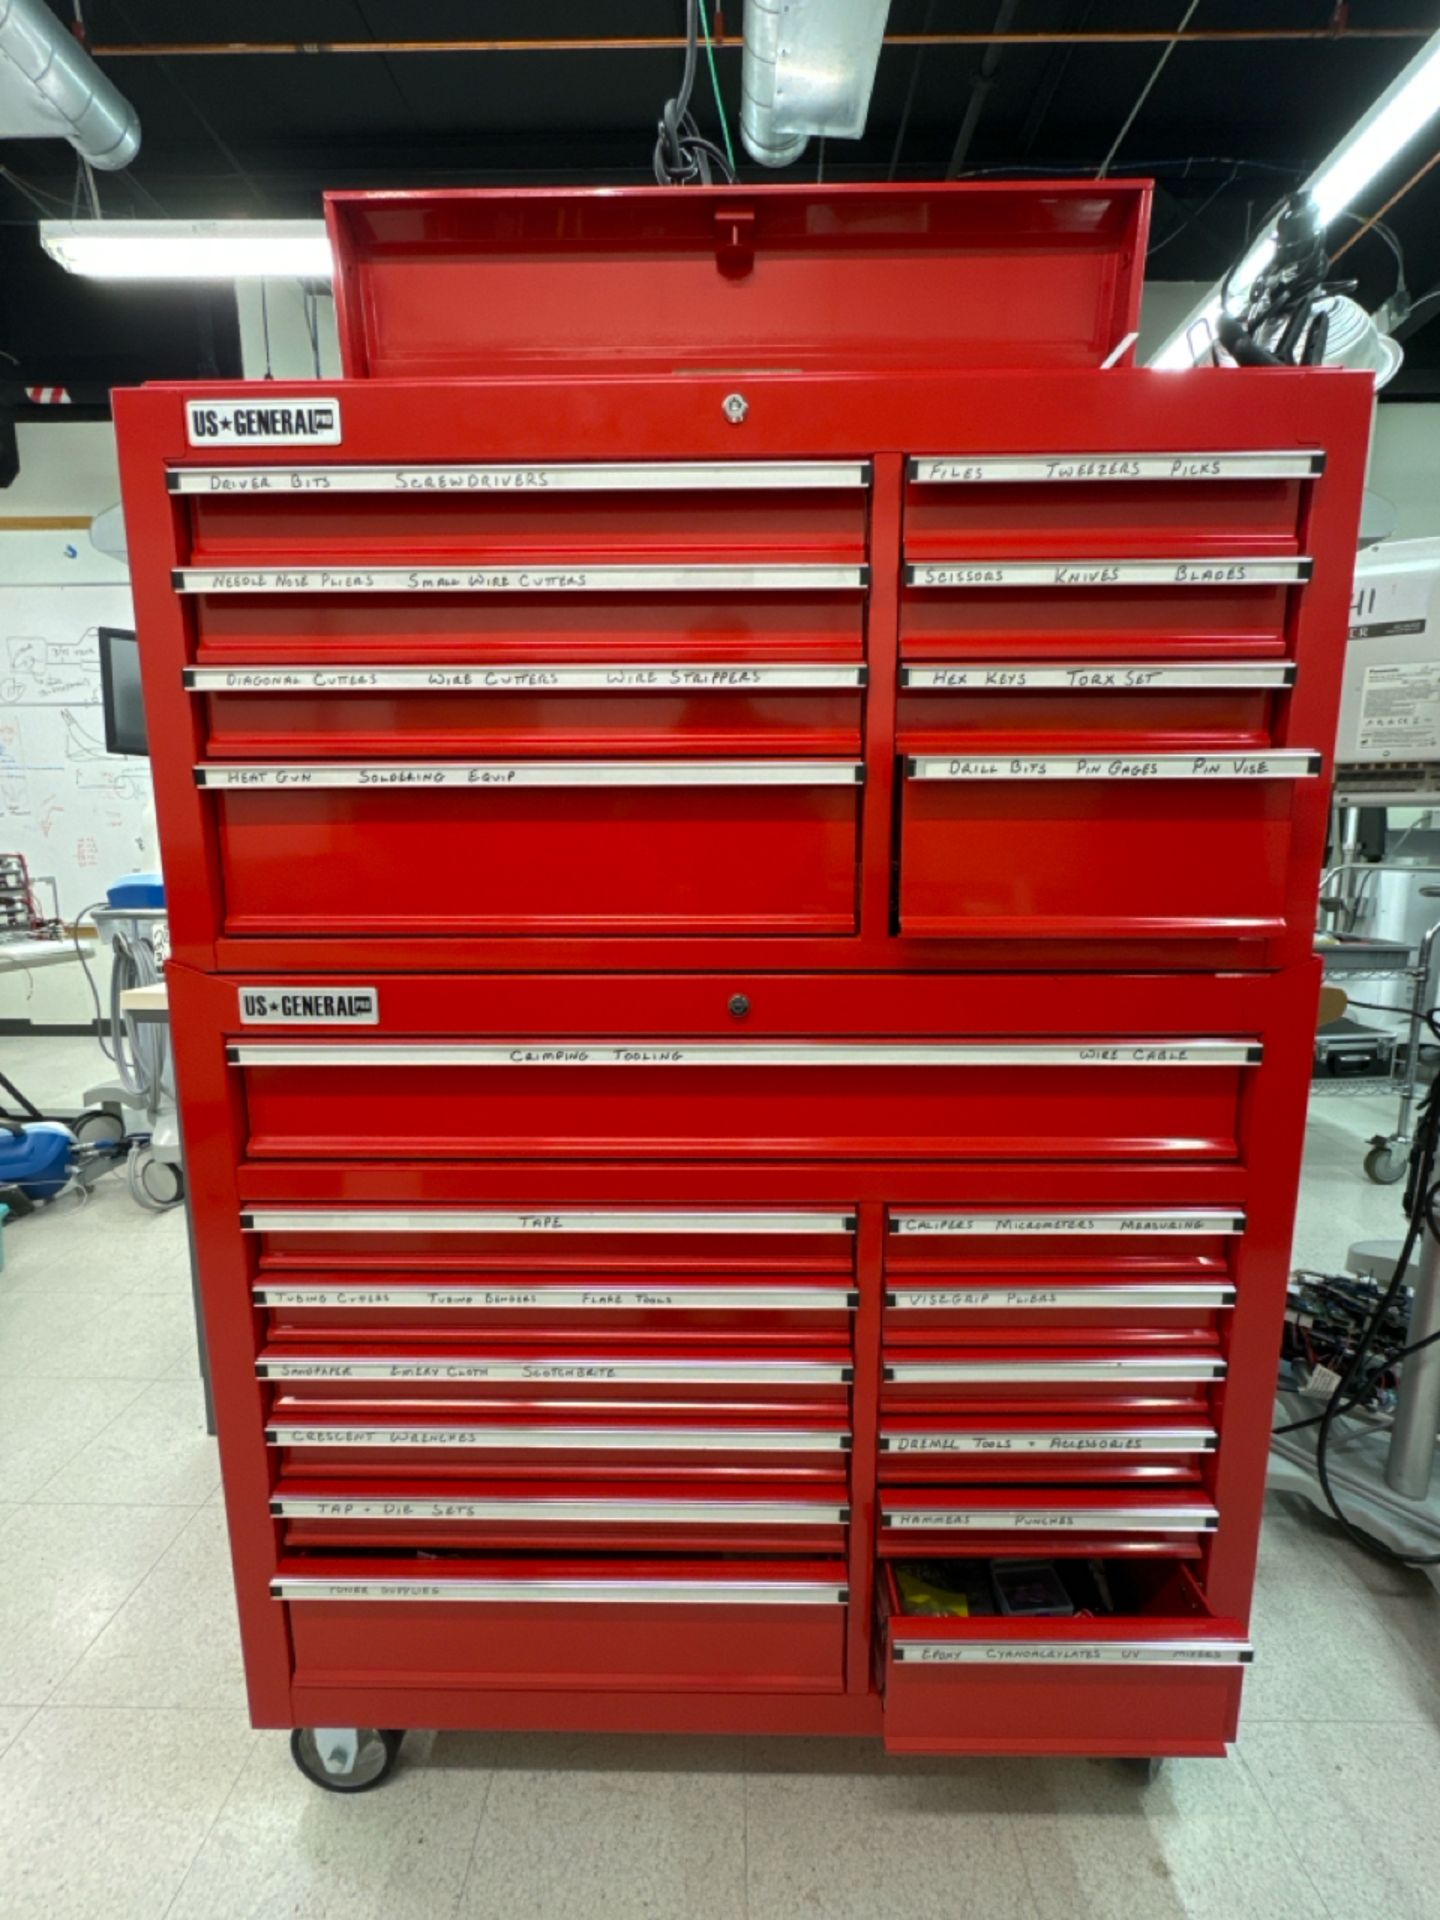 US General Industrial Mobile Tool Chest w/ Contents